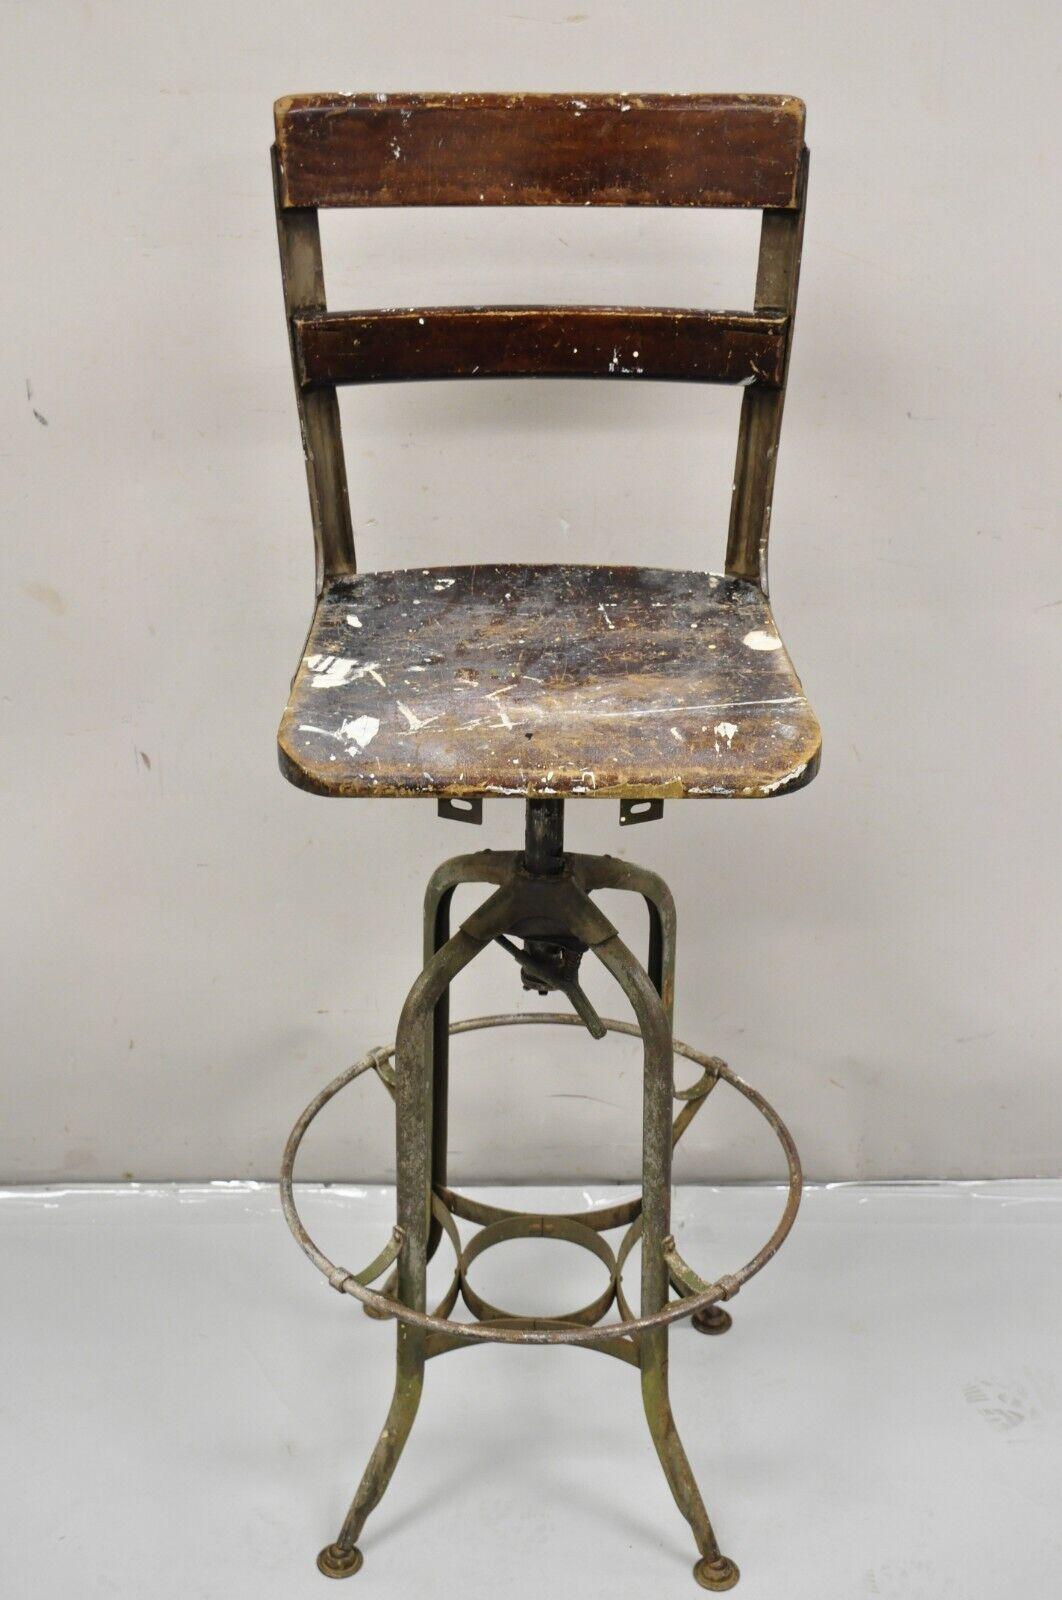 Vintage Industrial Toledo Metal Co Steel and Wooden Adjustable Drafting Stool Work Chair. Circa Early 20th Century. Measurements: 44